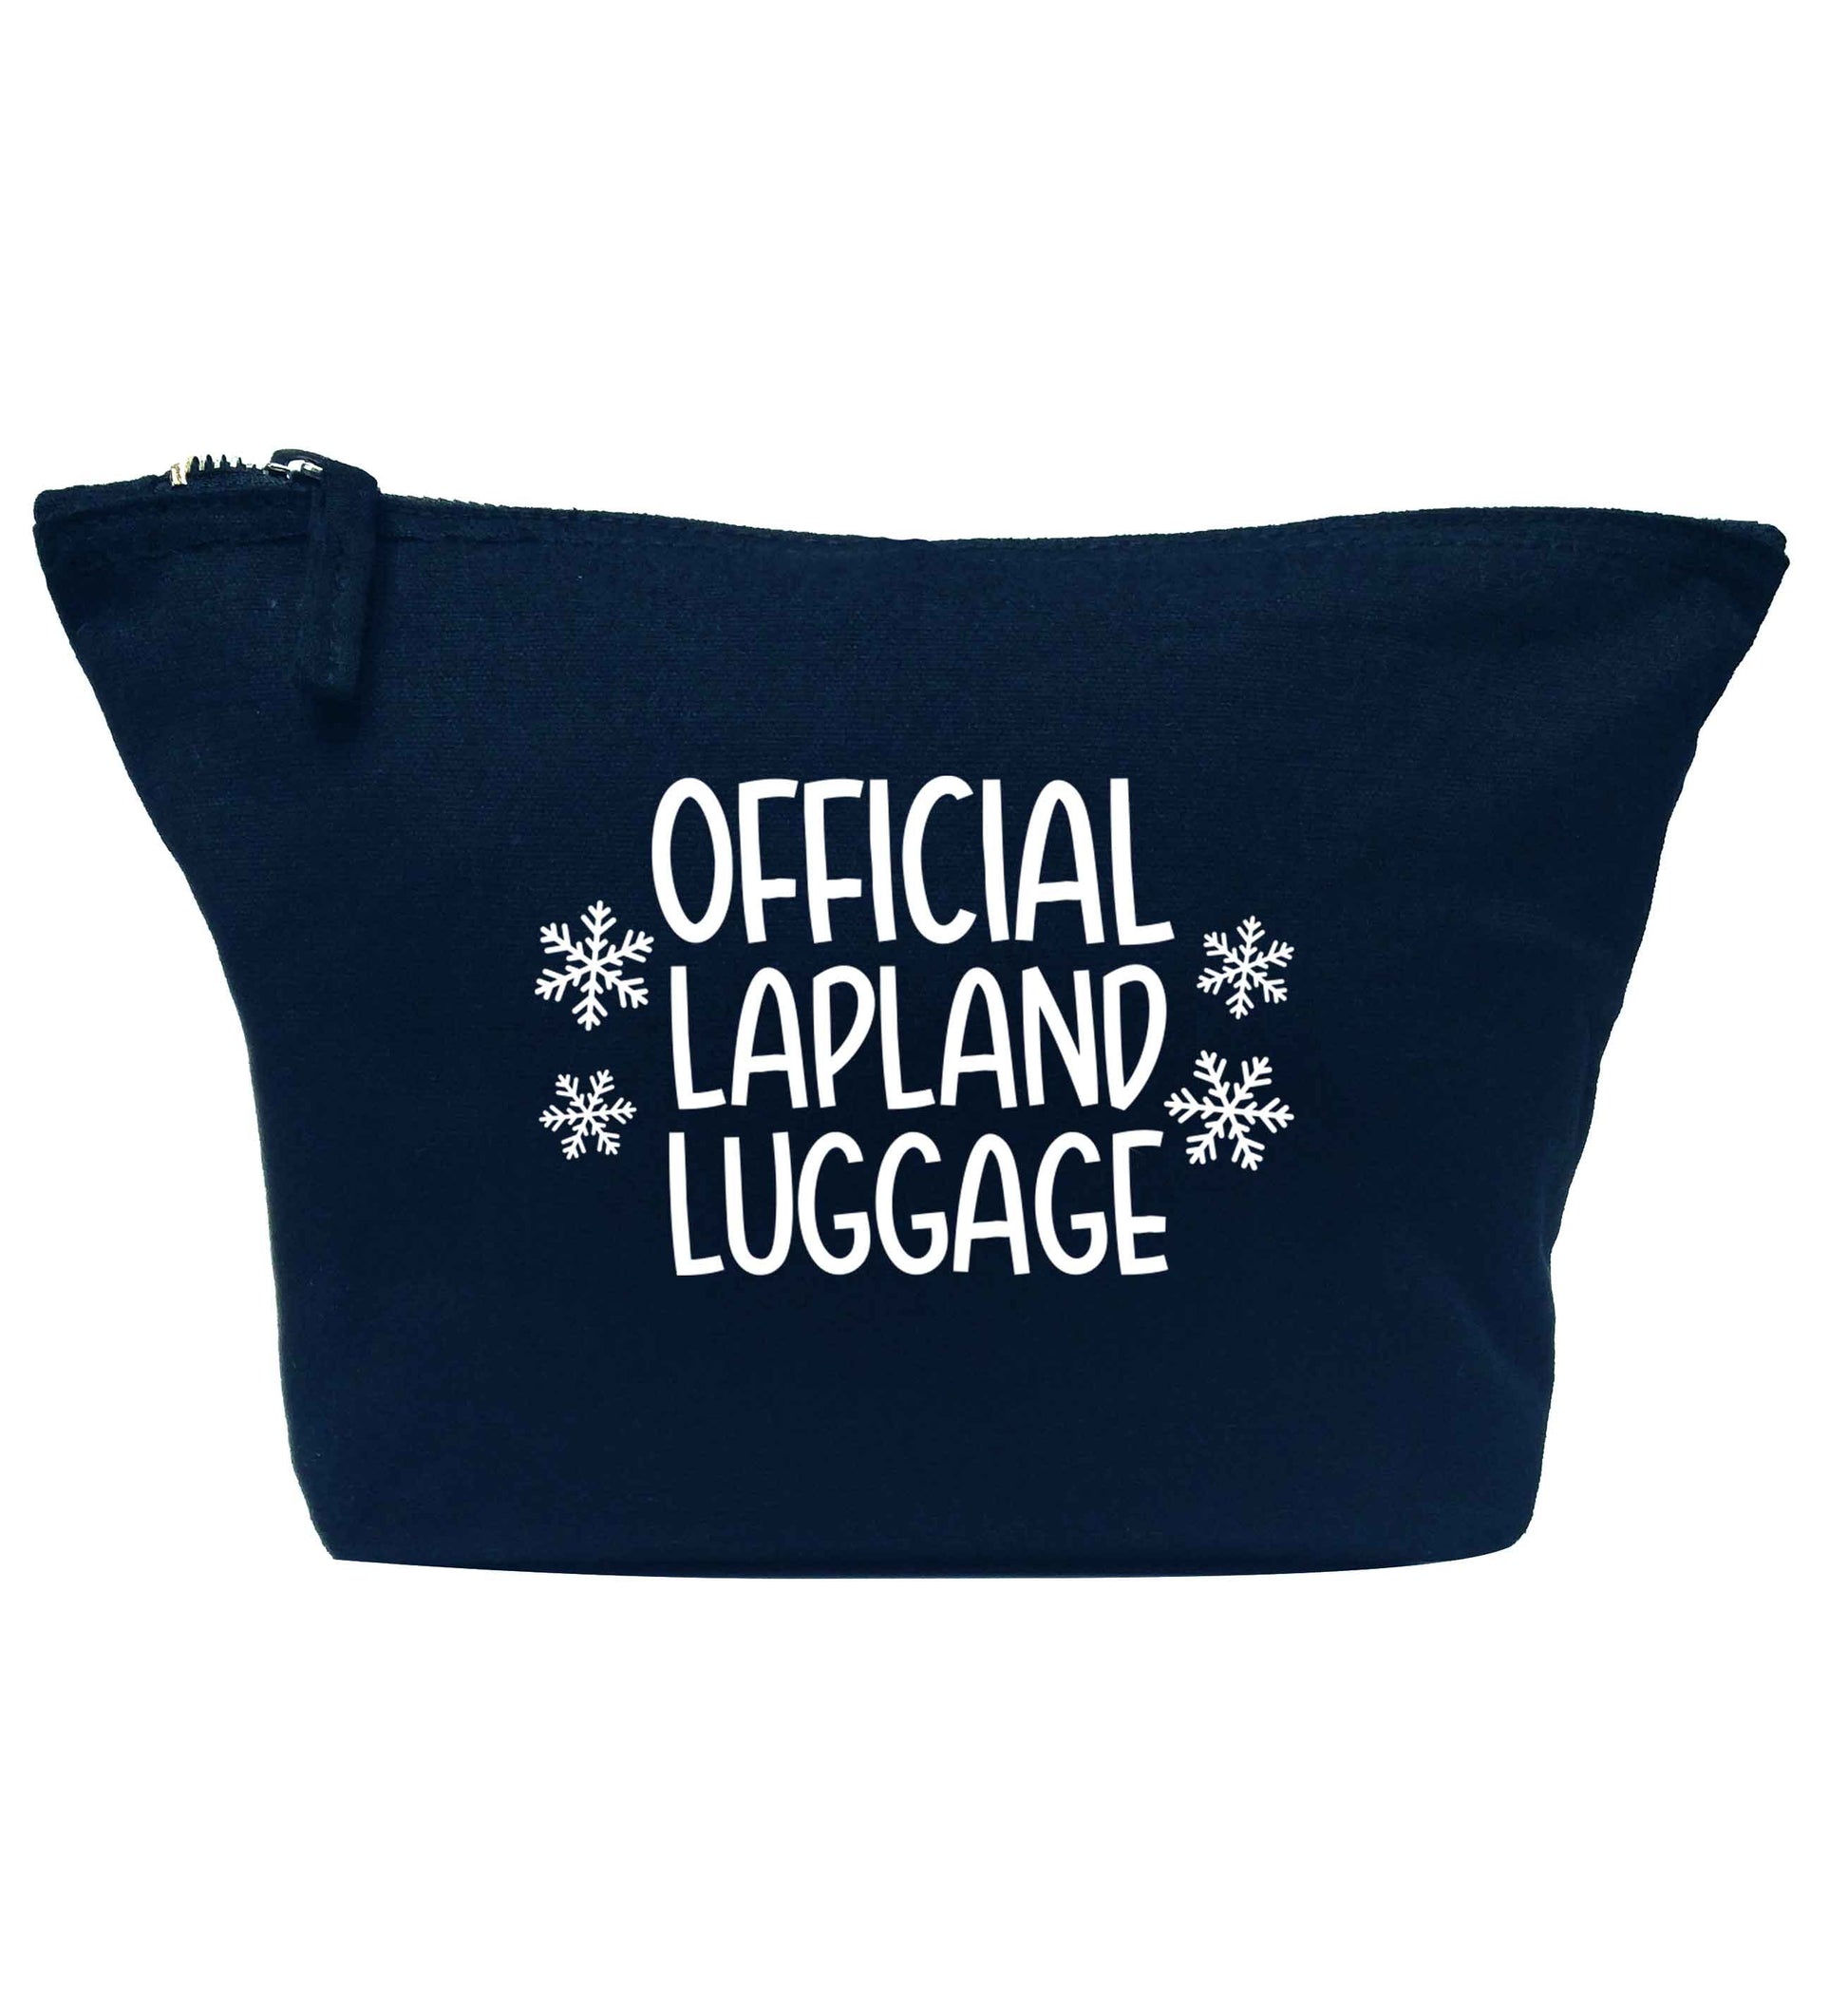 Official Lapland luggage navy makeup bag